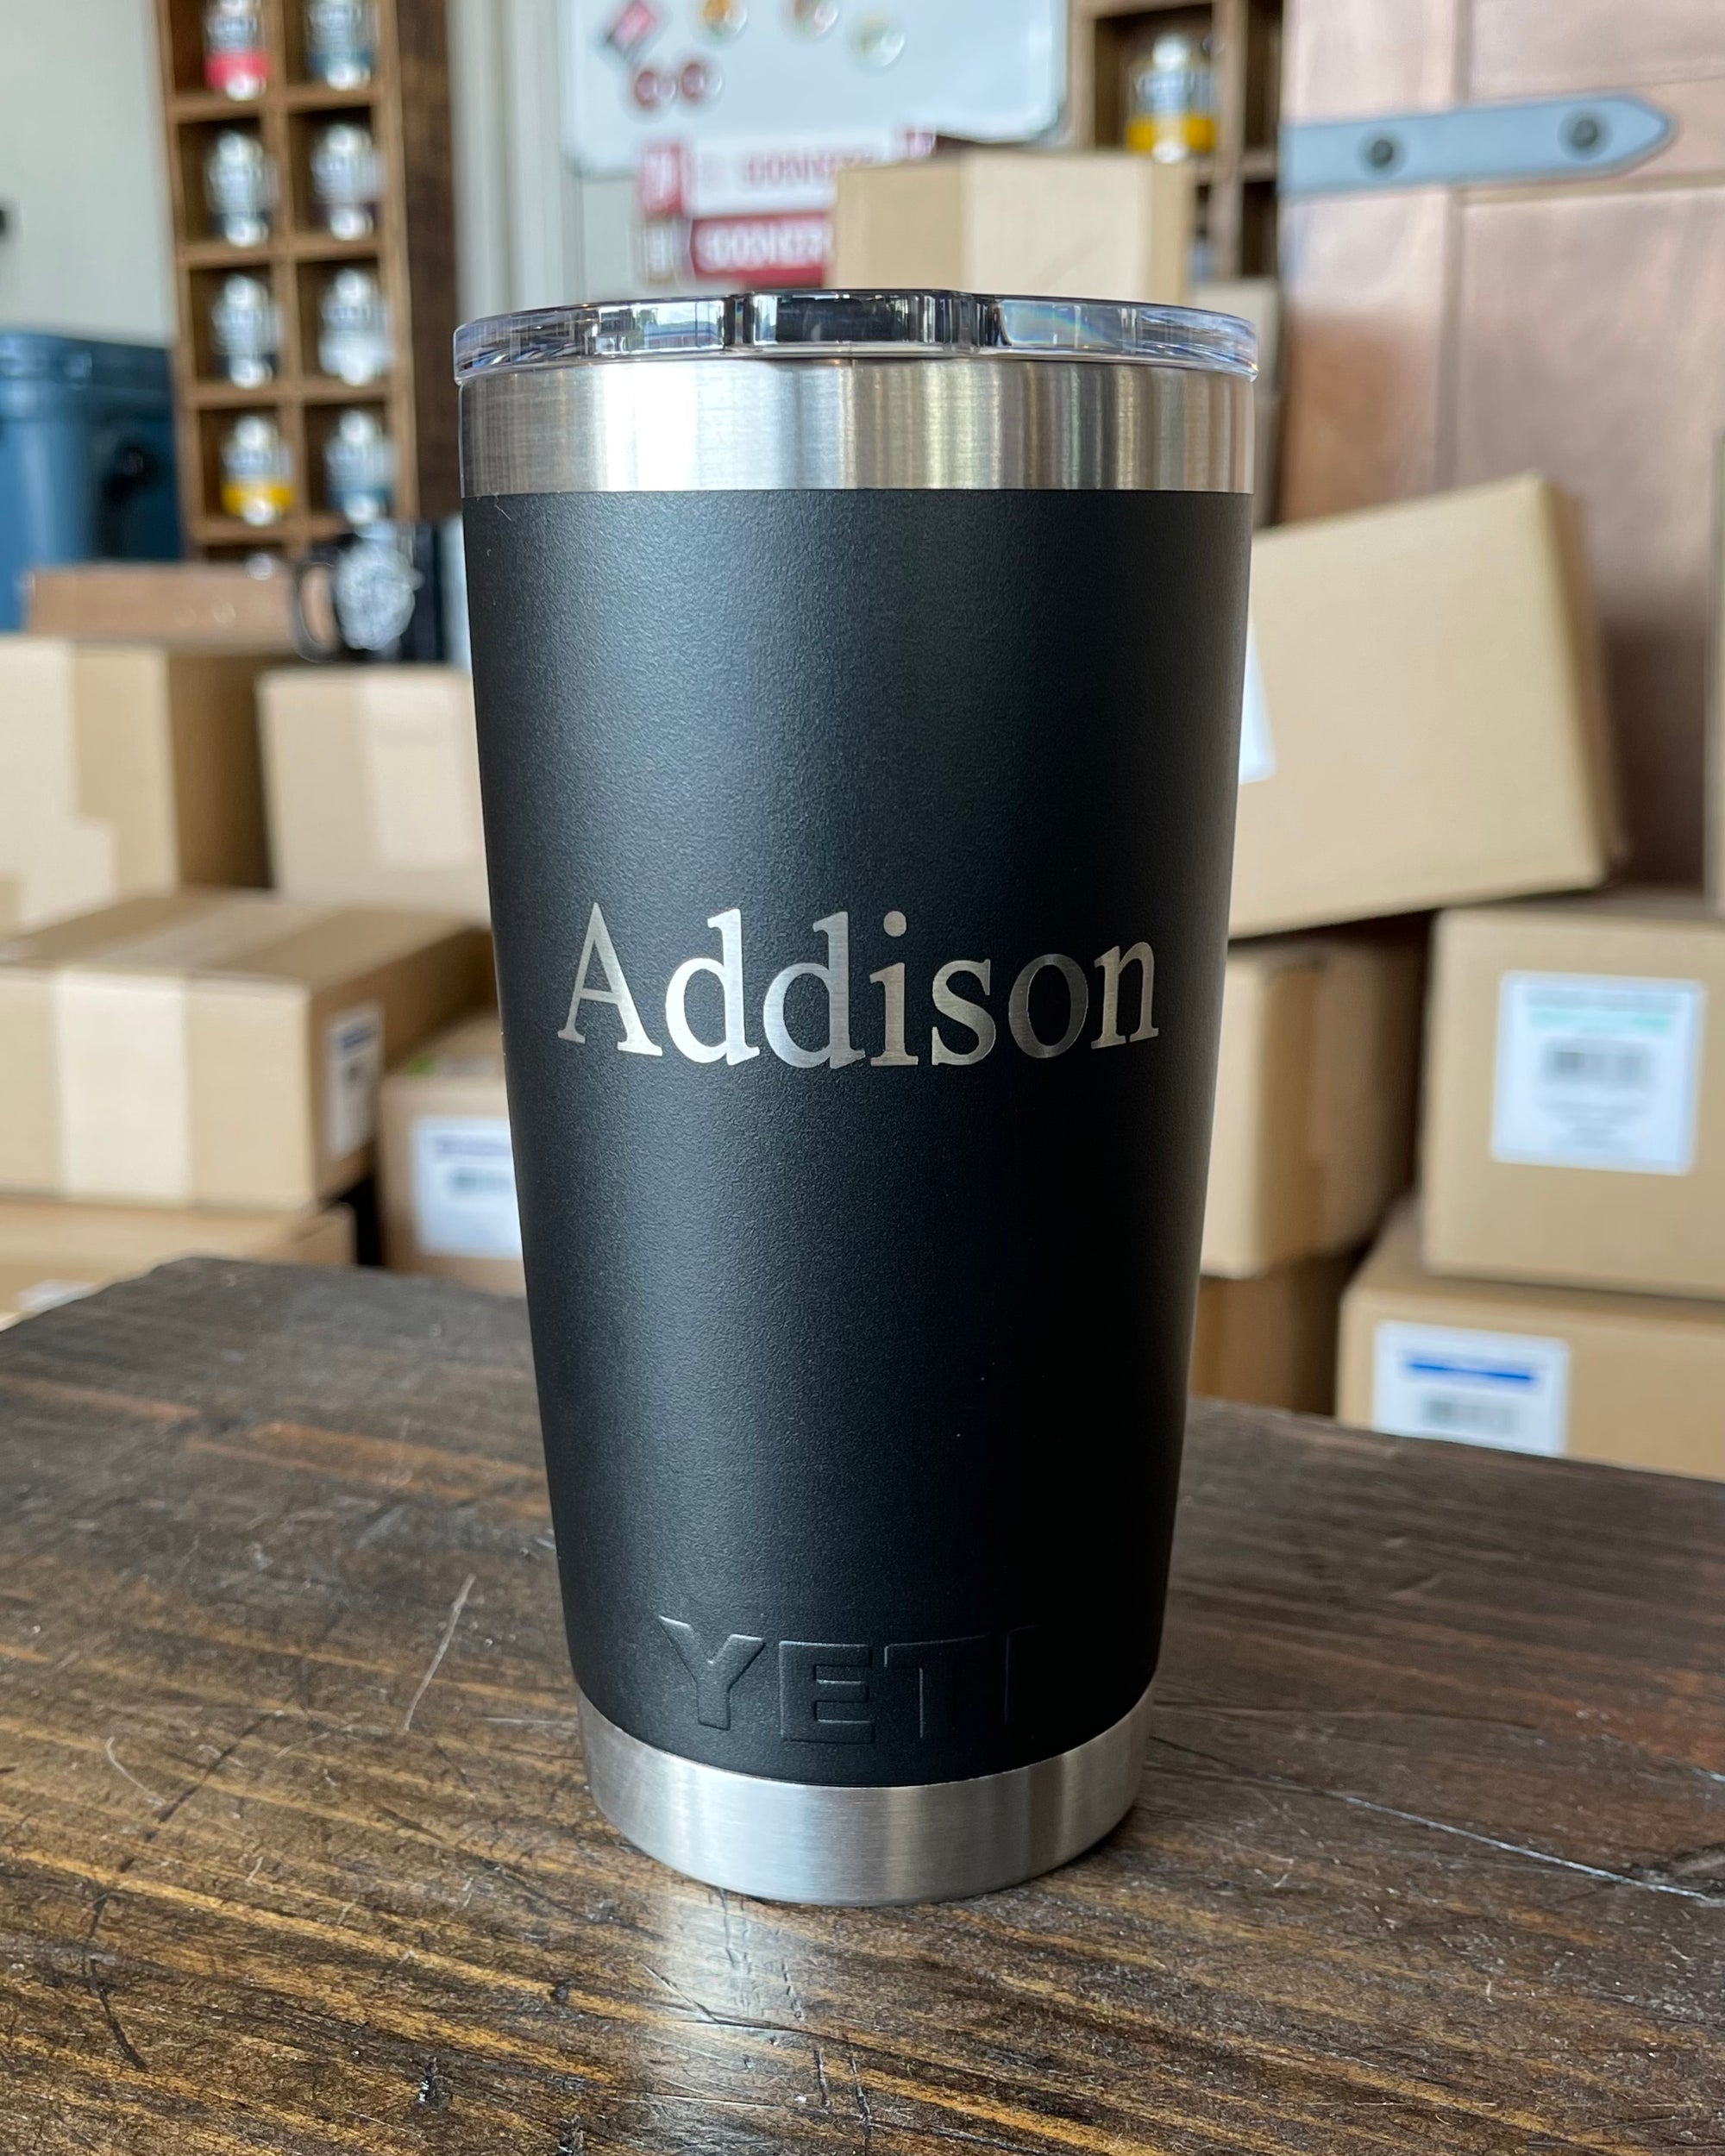 Wildflowers Engraved YETI 26 Oz. Laser Engraved White Stainless Steel Yeti  Stackable Rambler With Straw Lid 